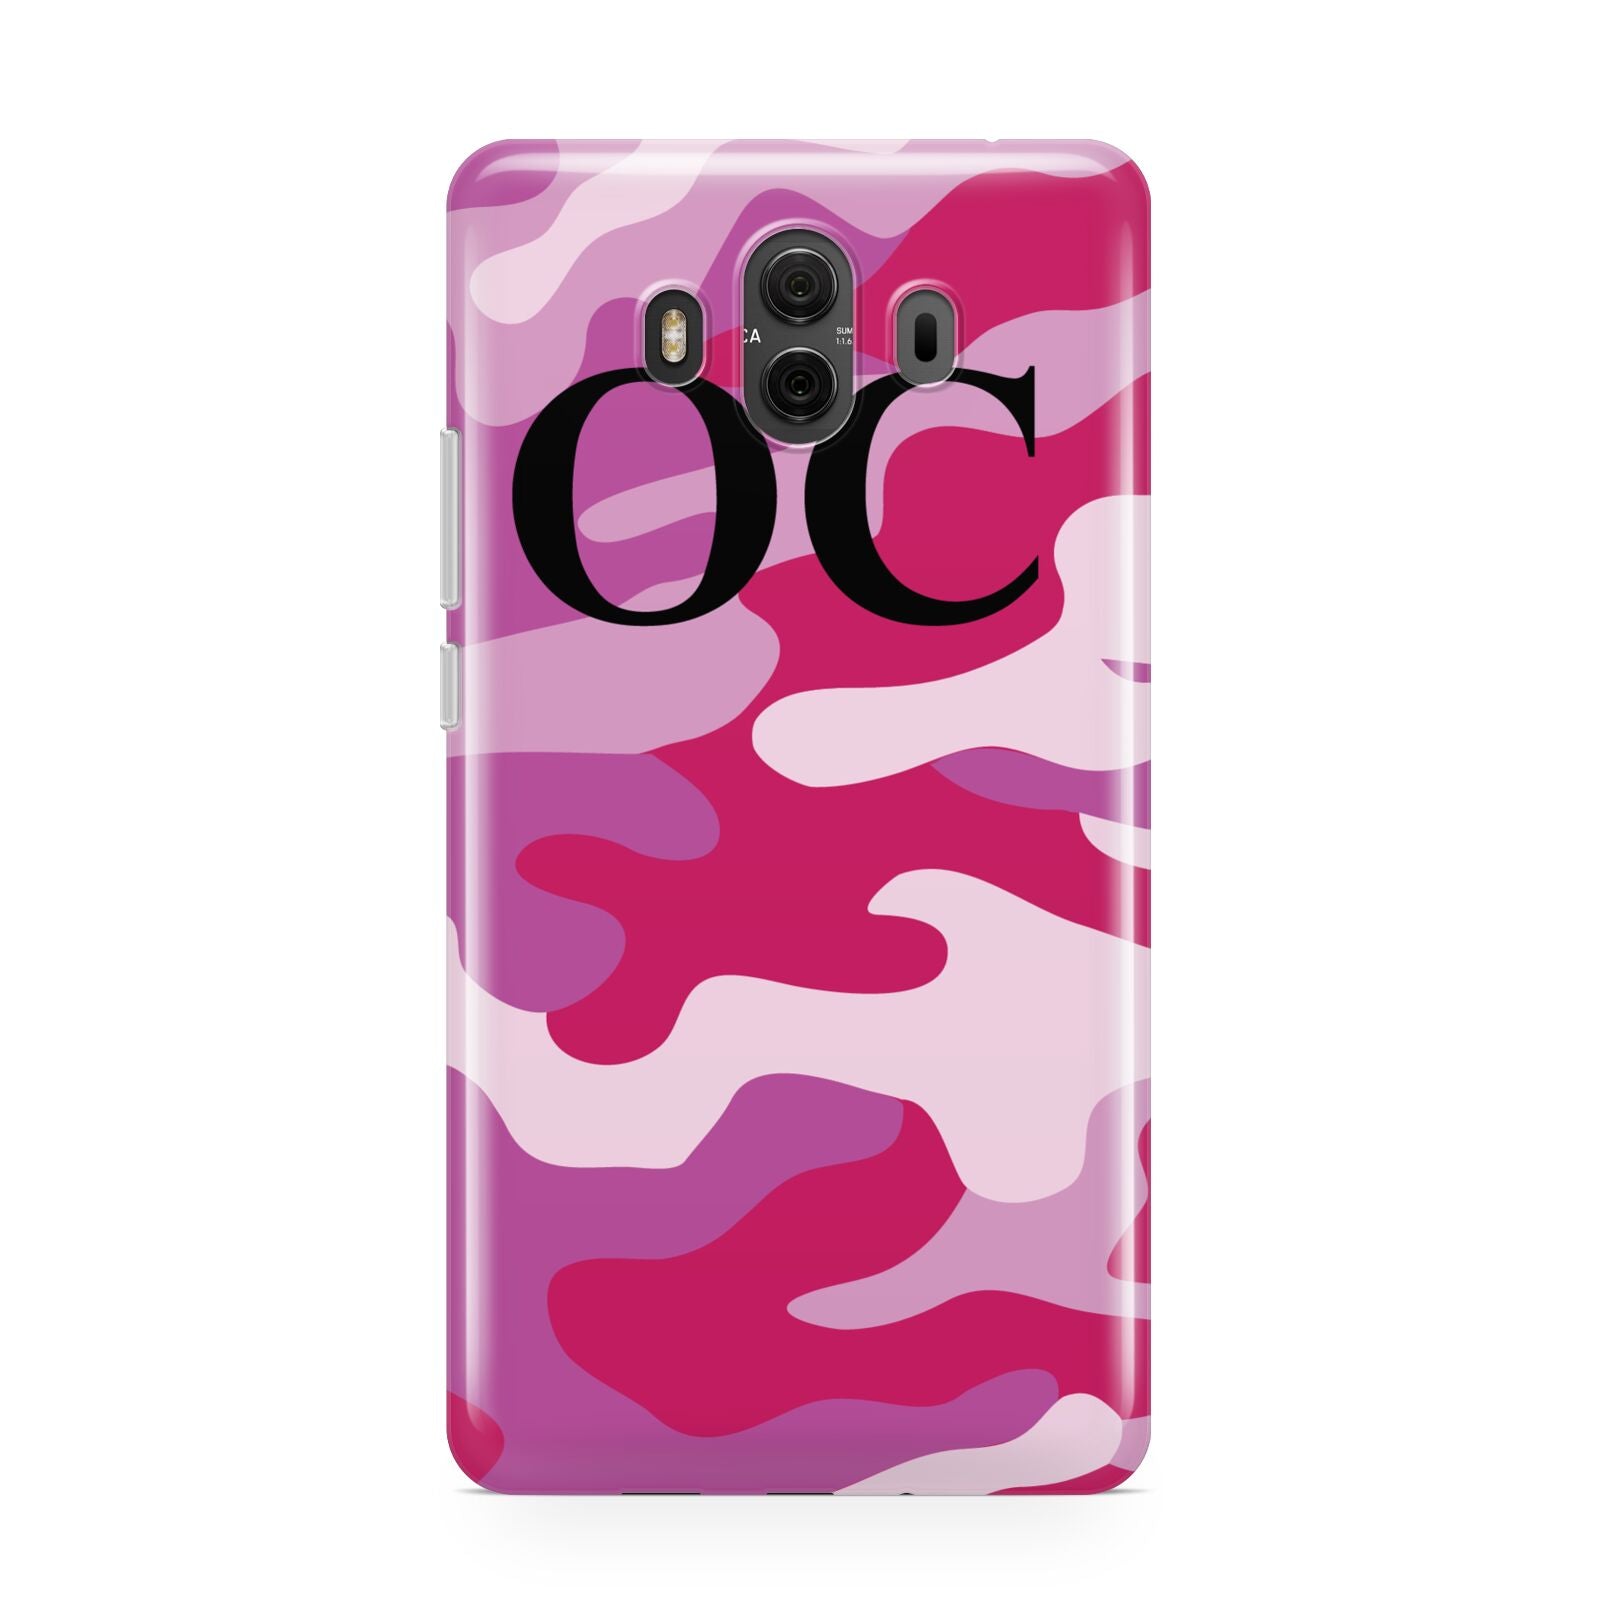 Camouflage Personalised Huawei Mate 10 Protective Phone Case